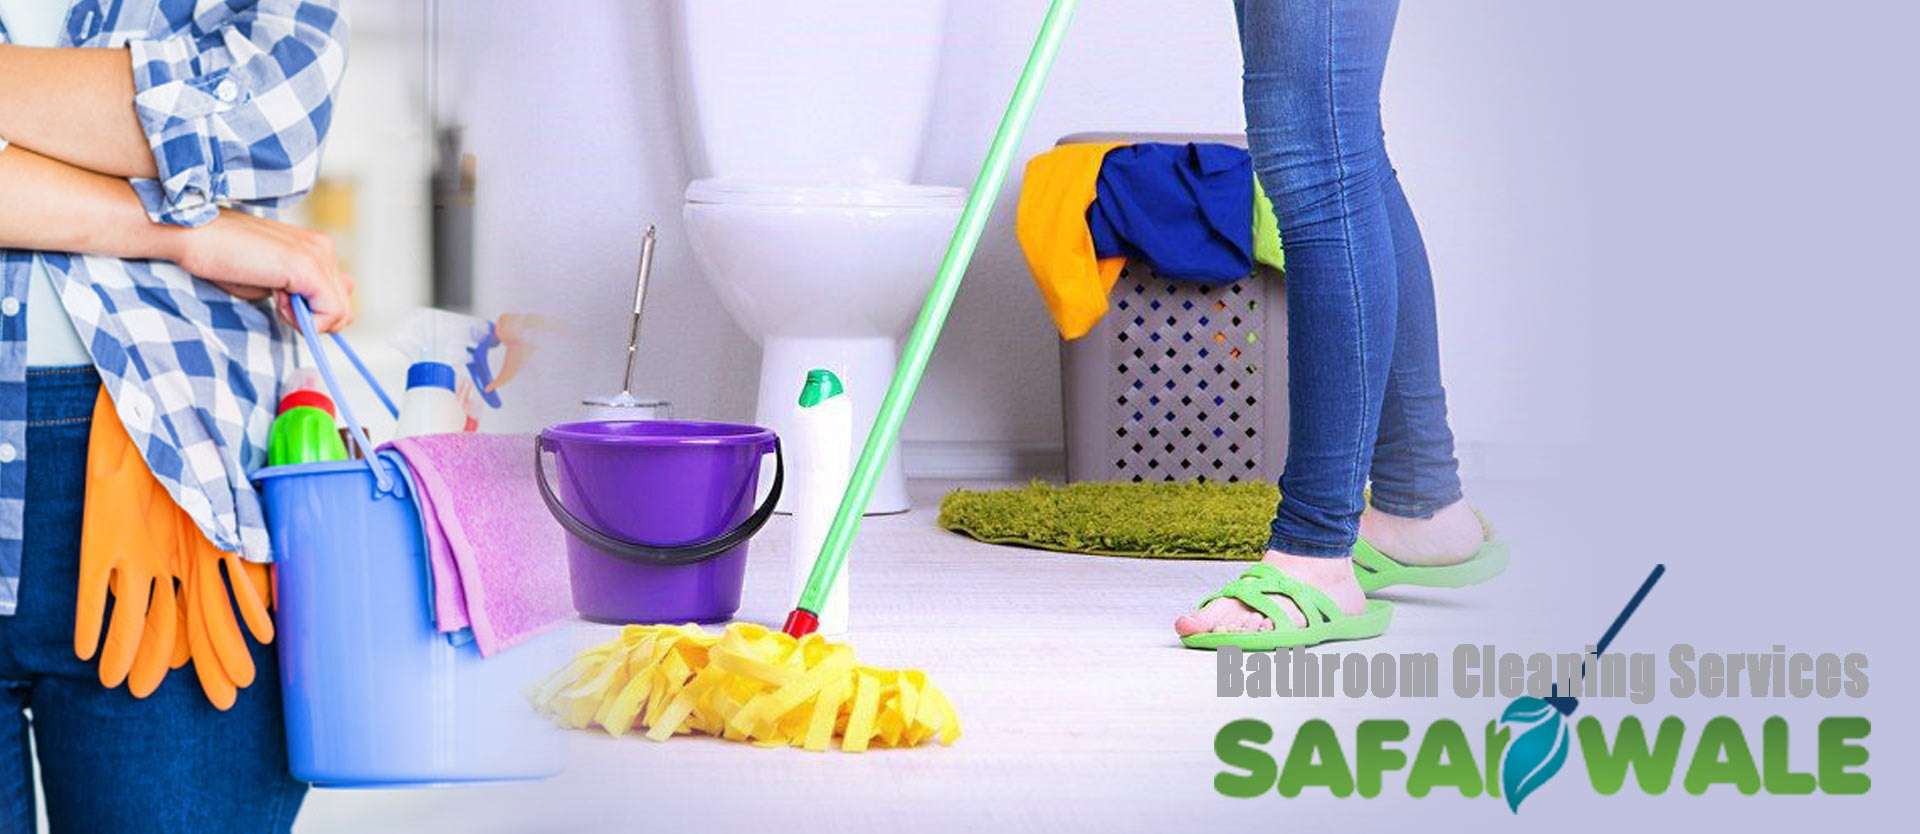 Bathroom Cleaning Services In Ghaziabad